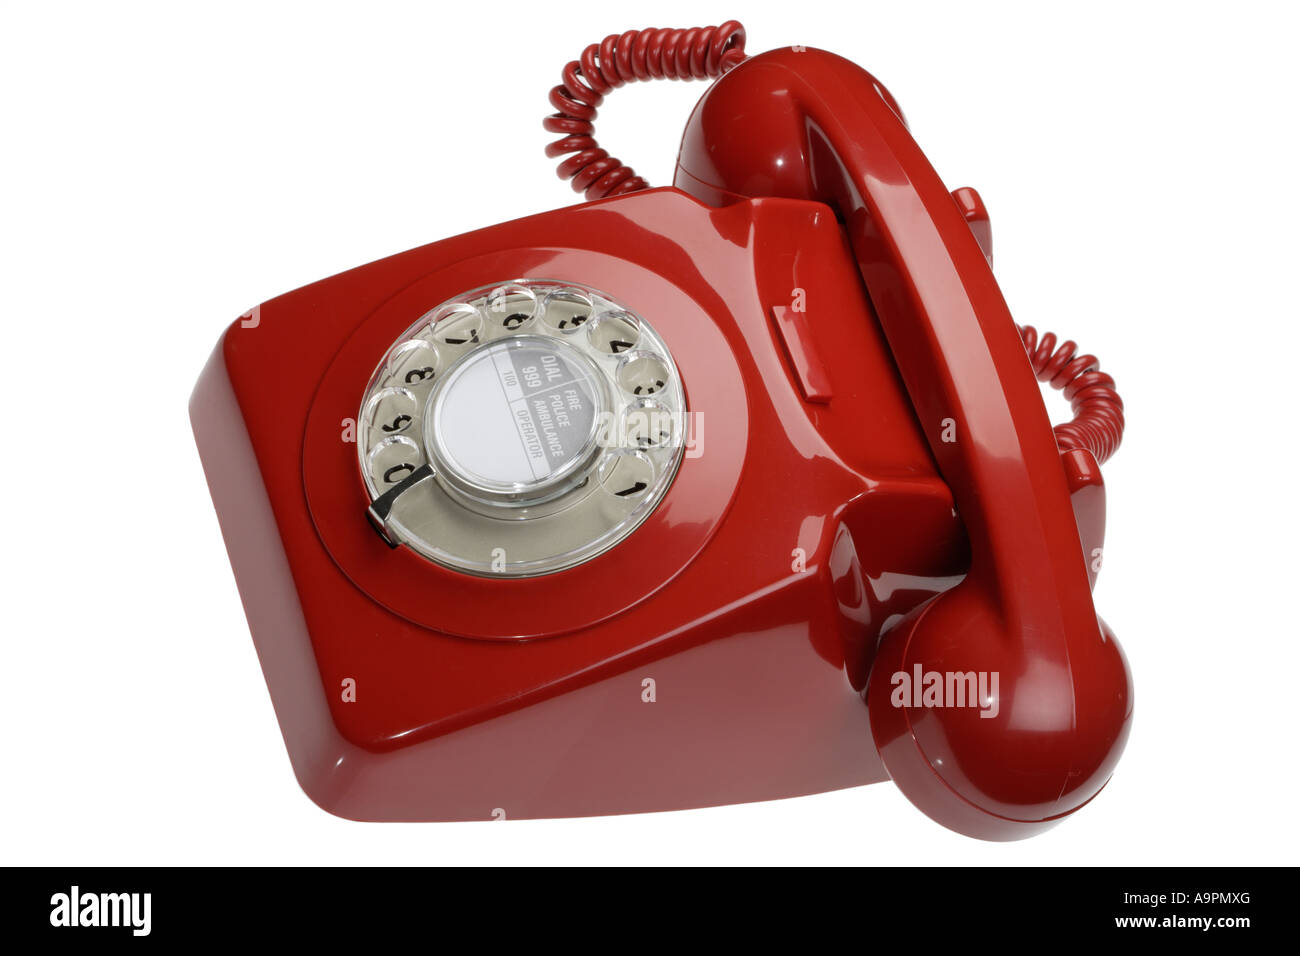 Red old fashioned disc dialling phone Stock Photo